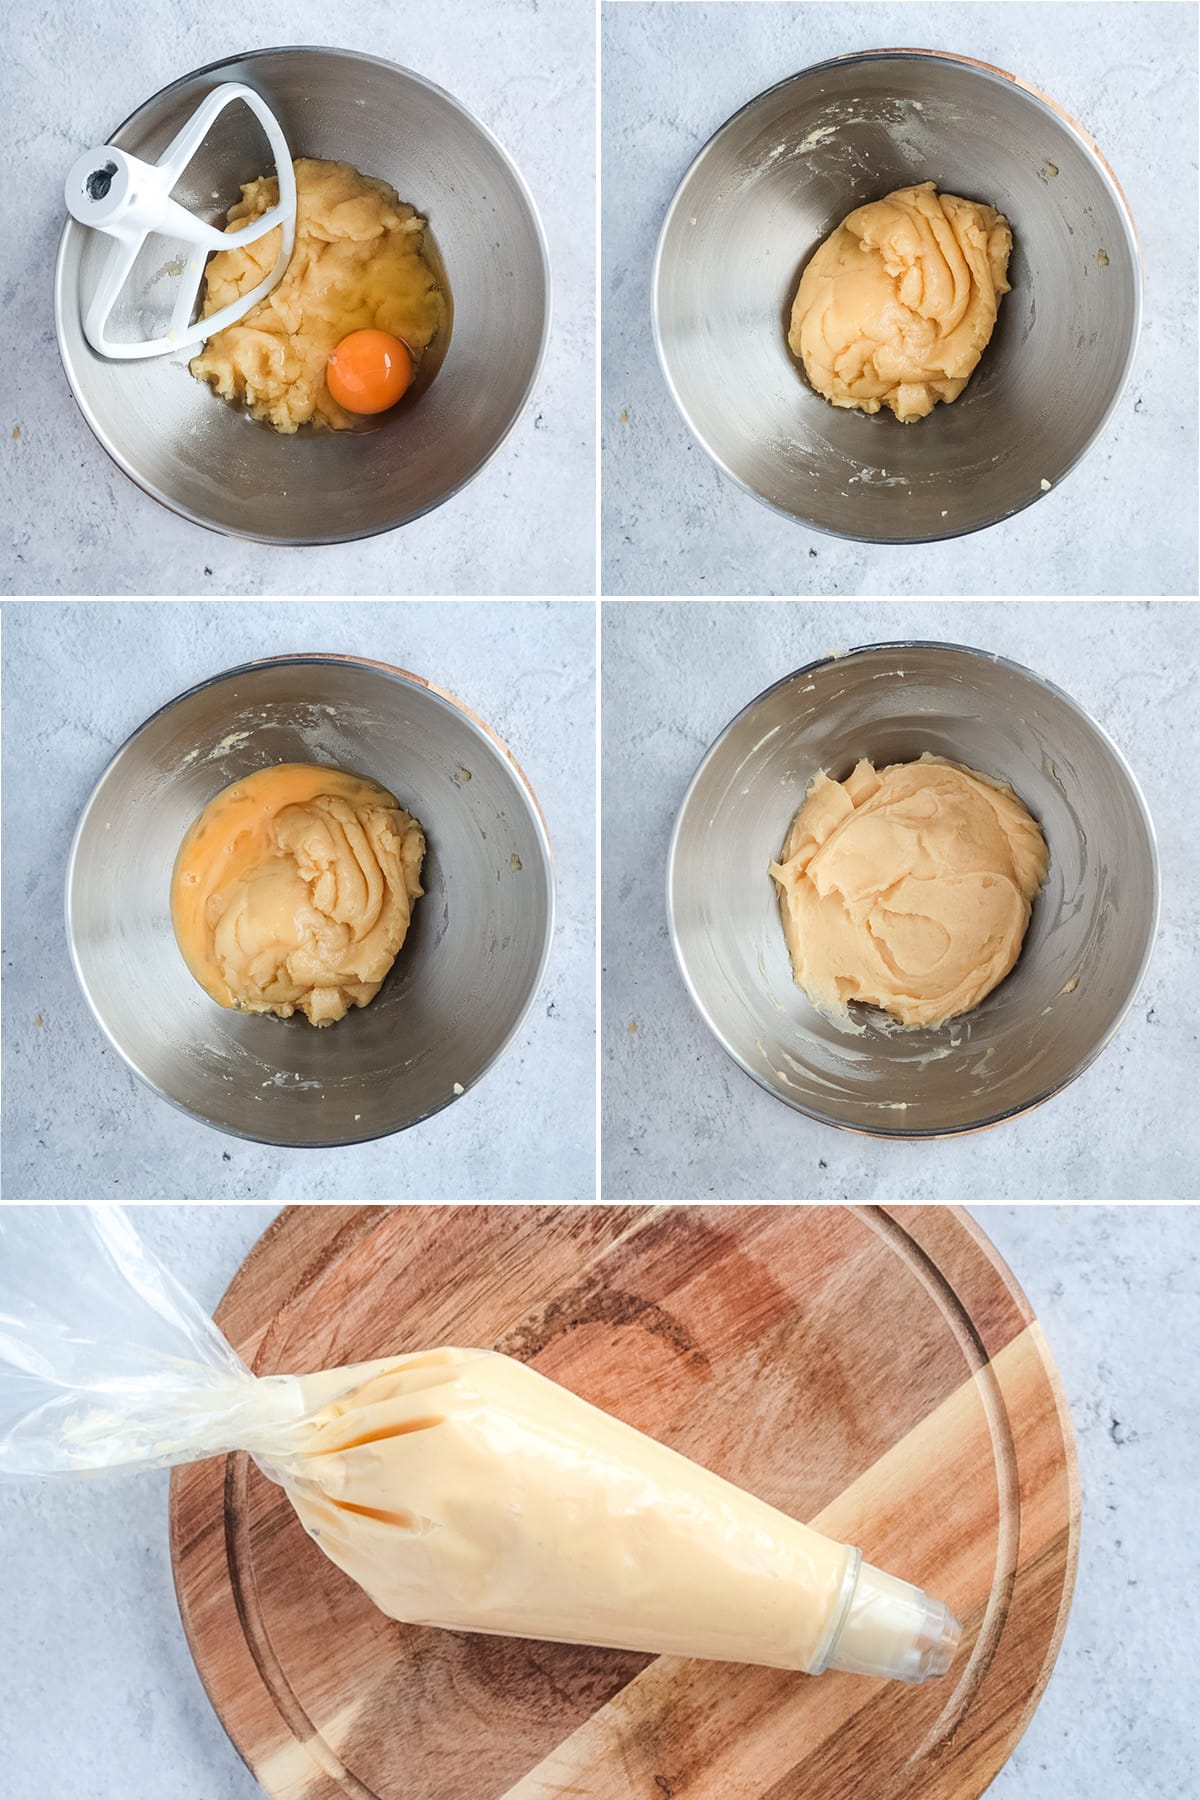 Making Choux Pastry: step 5 to 8